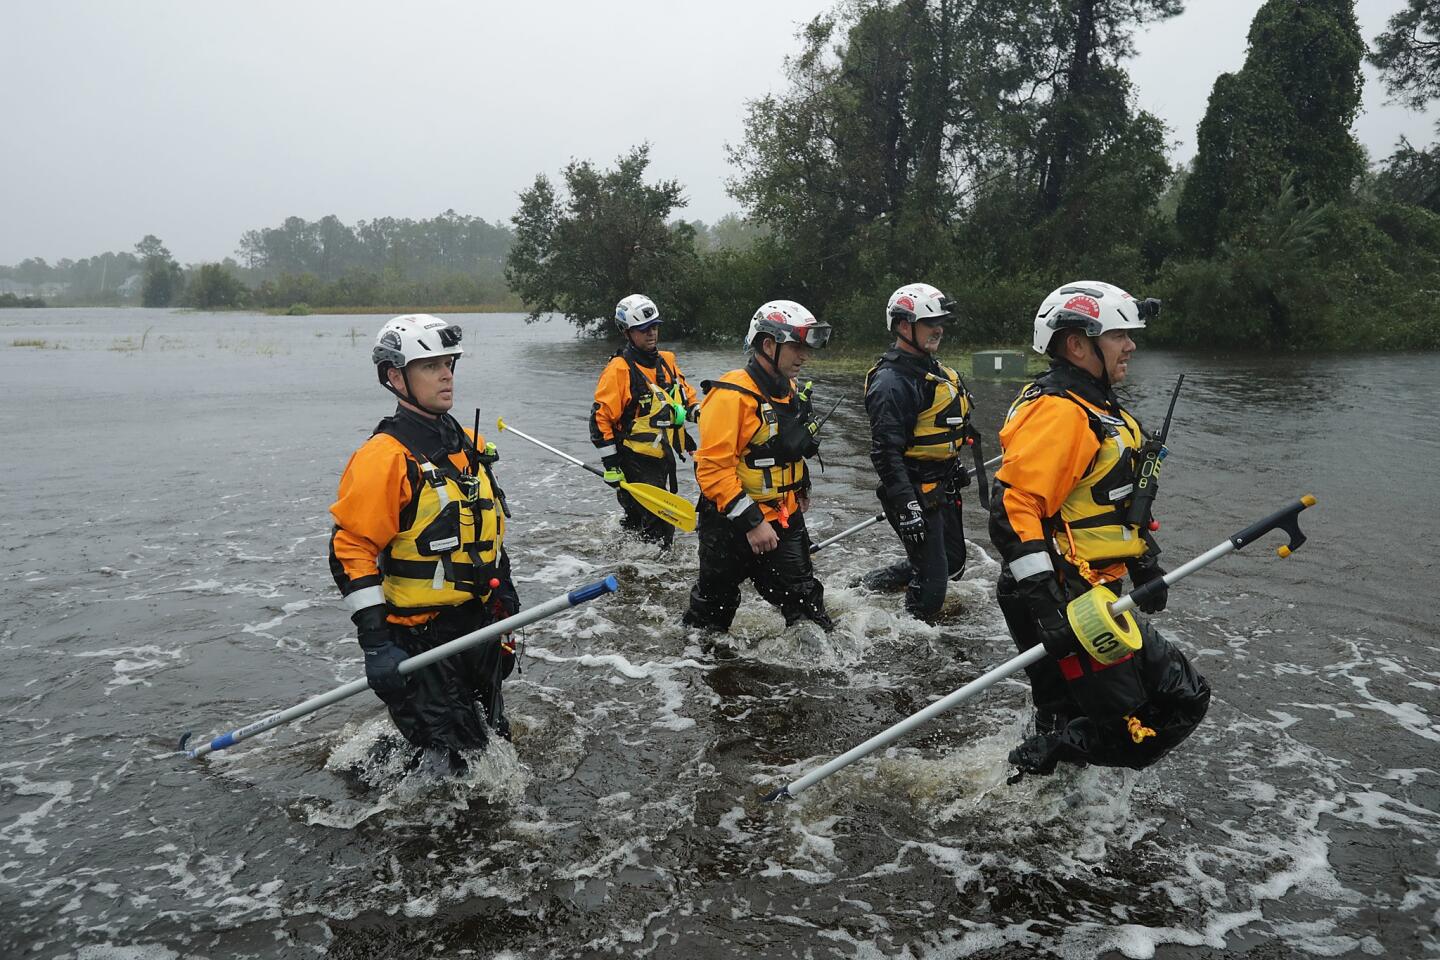 Members of the FEMA Urban Search and Rescue Task Force 4 from Oakland search a flooded neighborhood for evacuees in Fairfield Harbour, N.C.